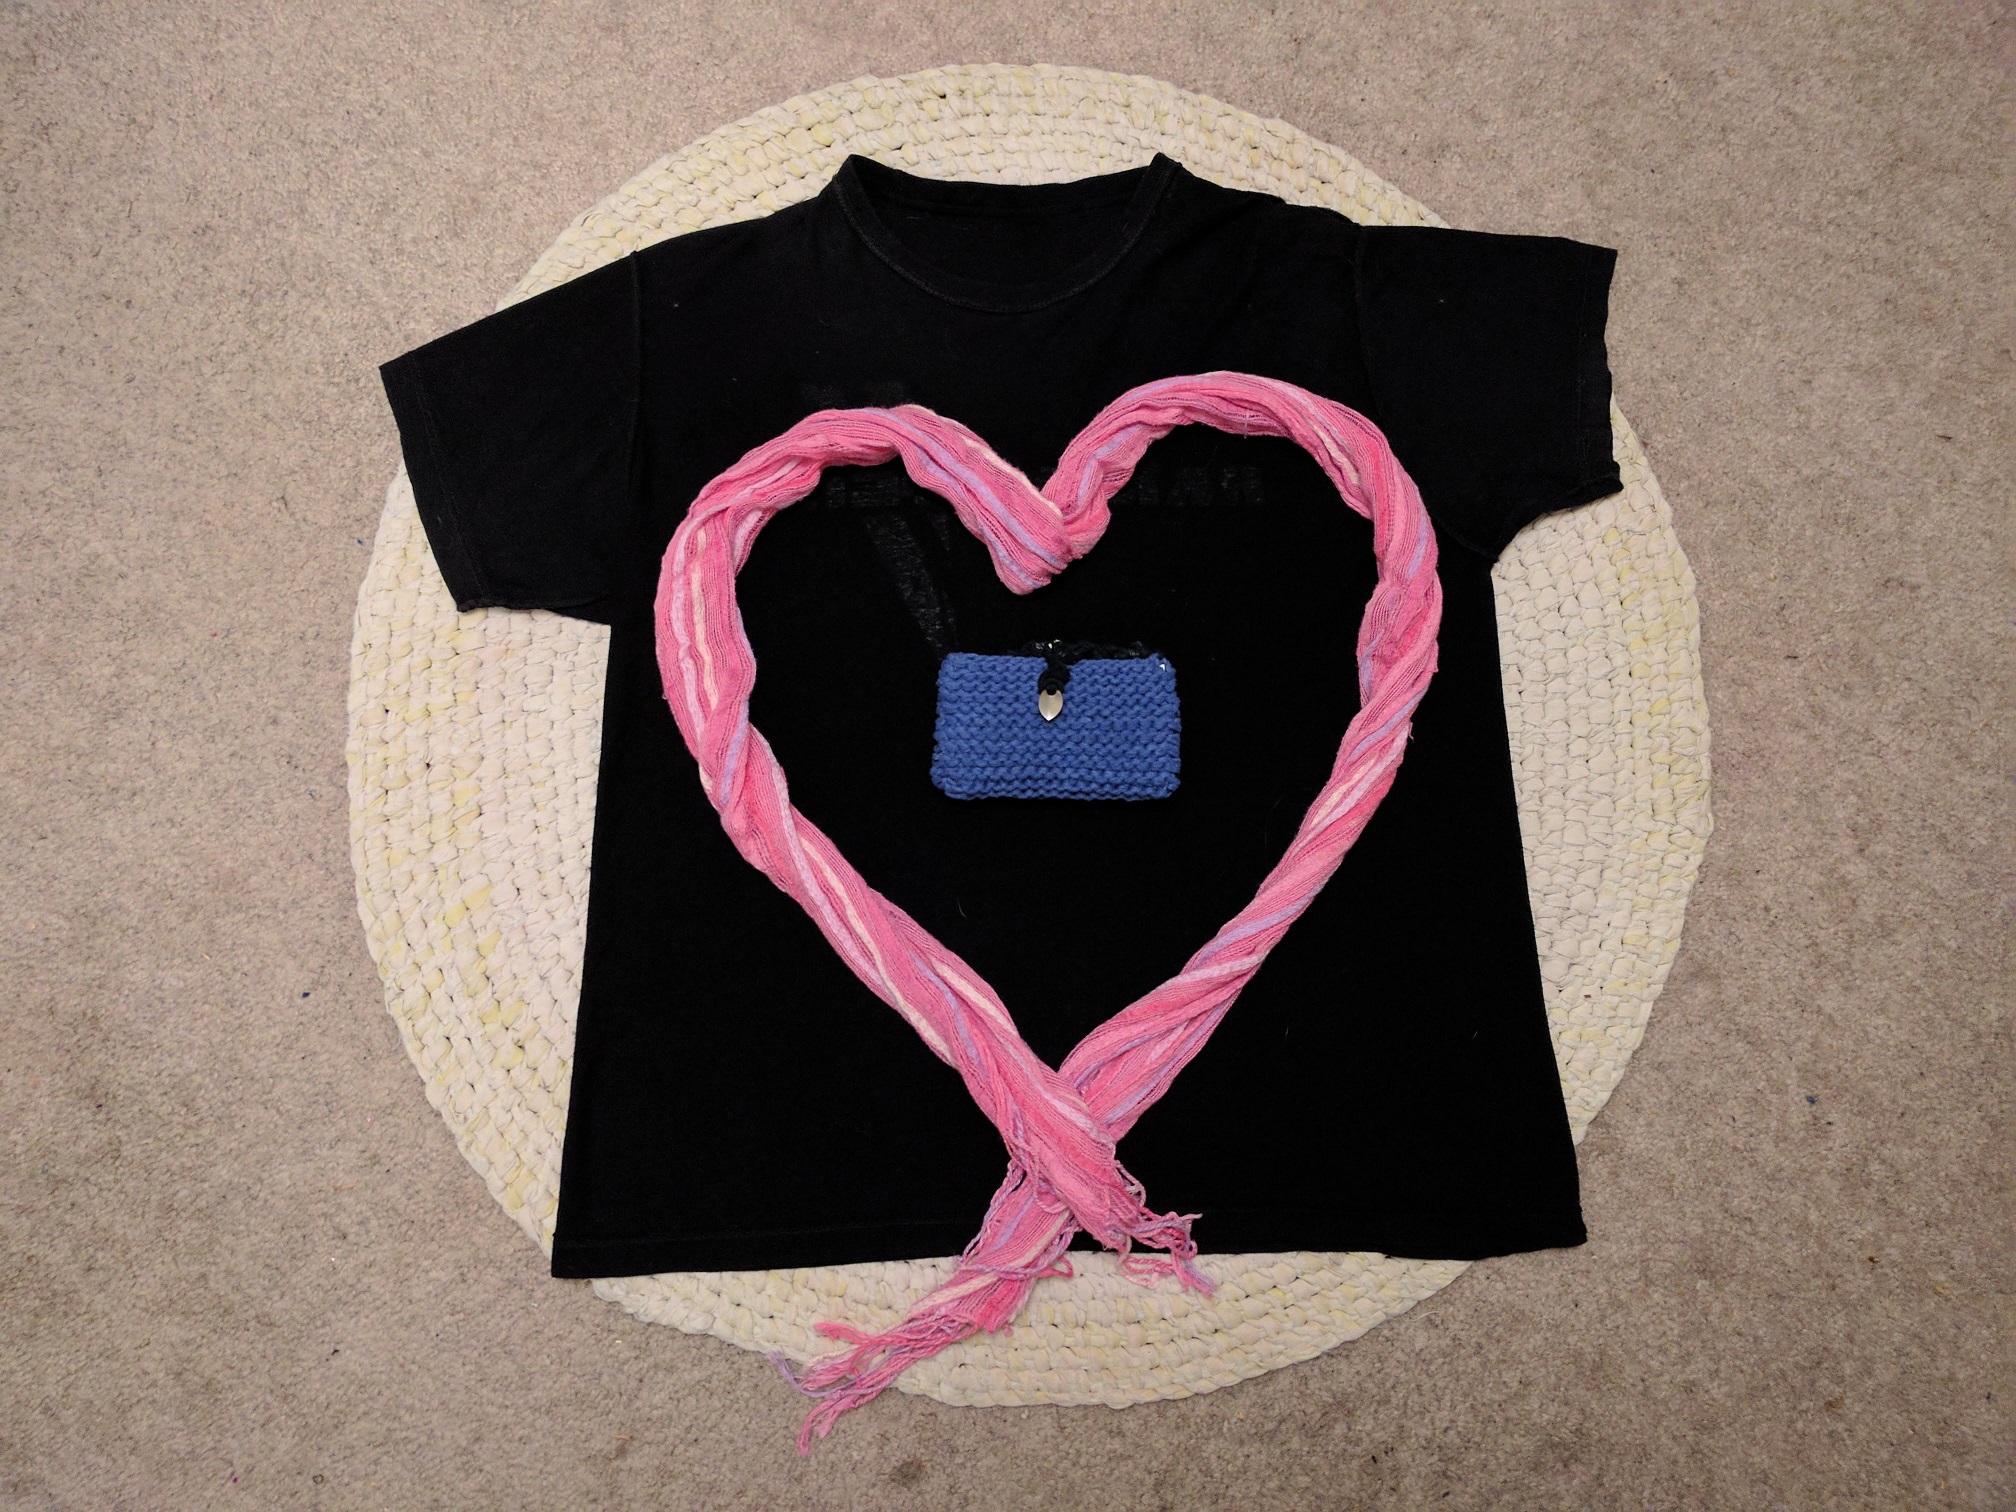 A tshirt on a knitted rug, with a pink heart drawn in the center with a scarf, and the blue envelope in the middle.